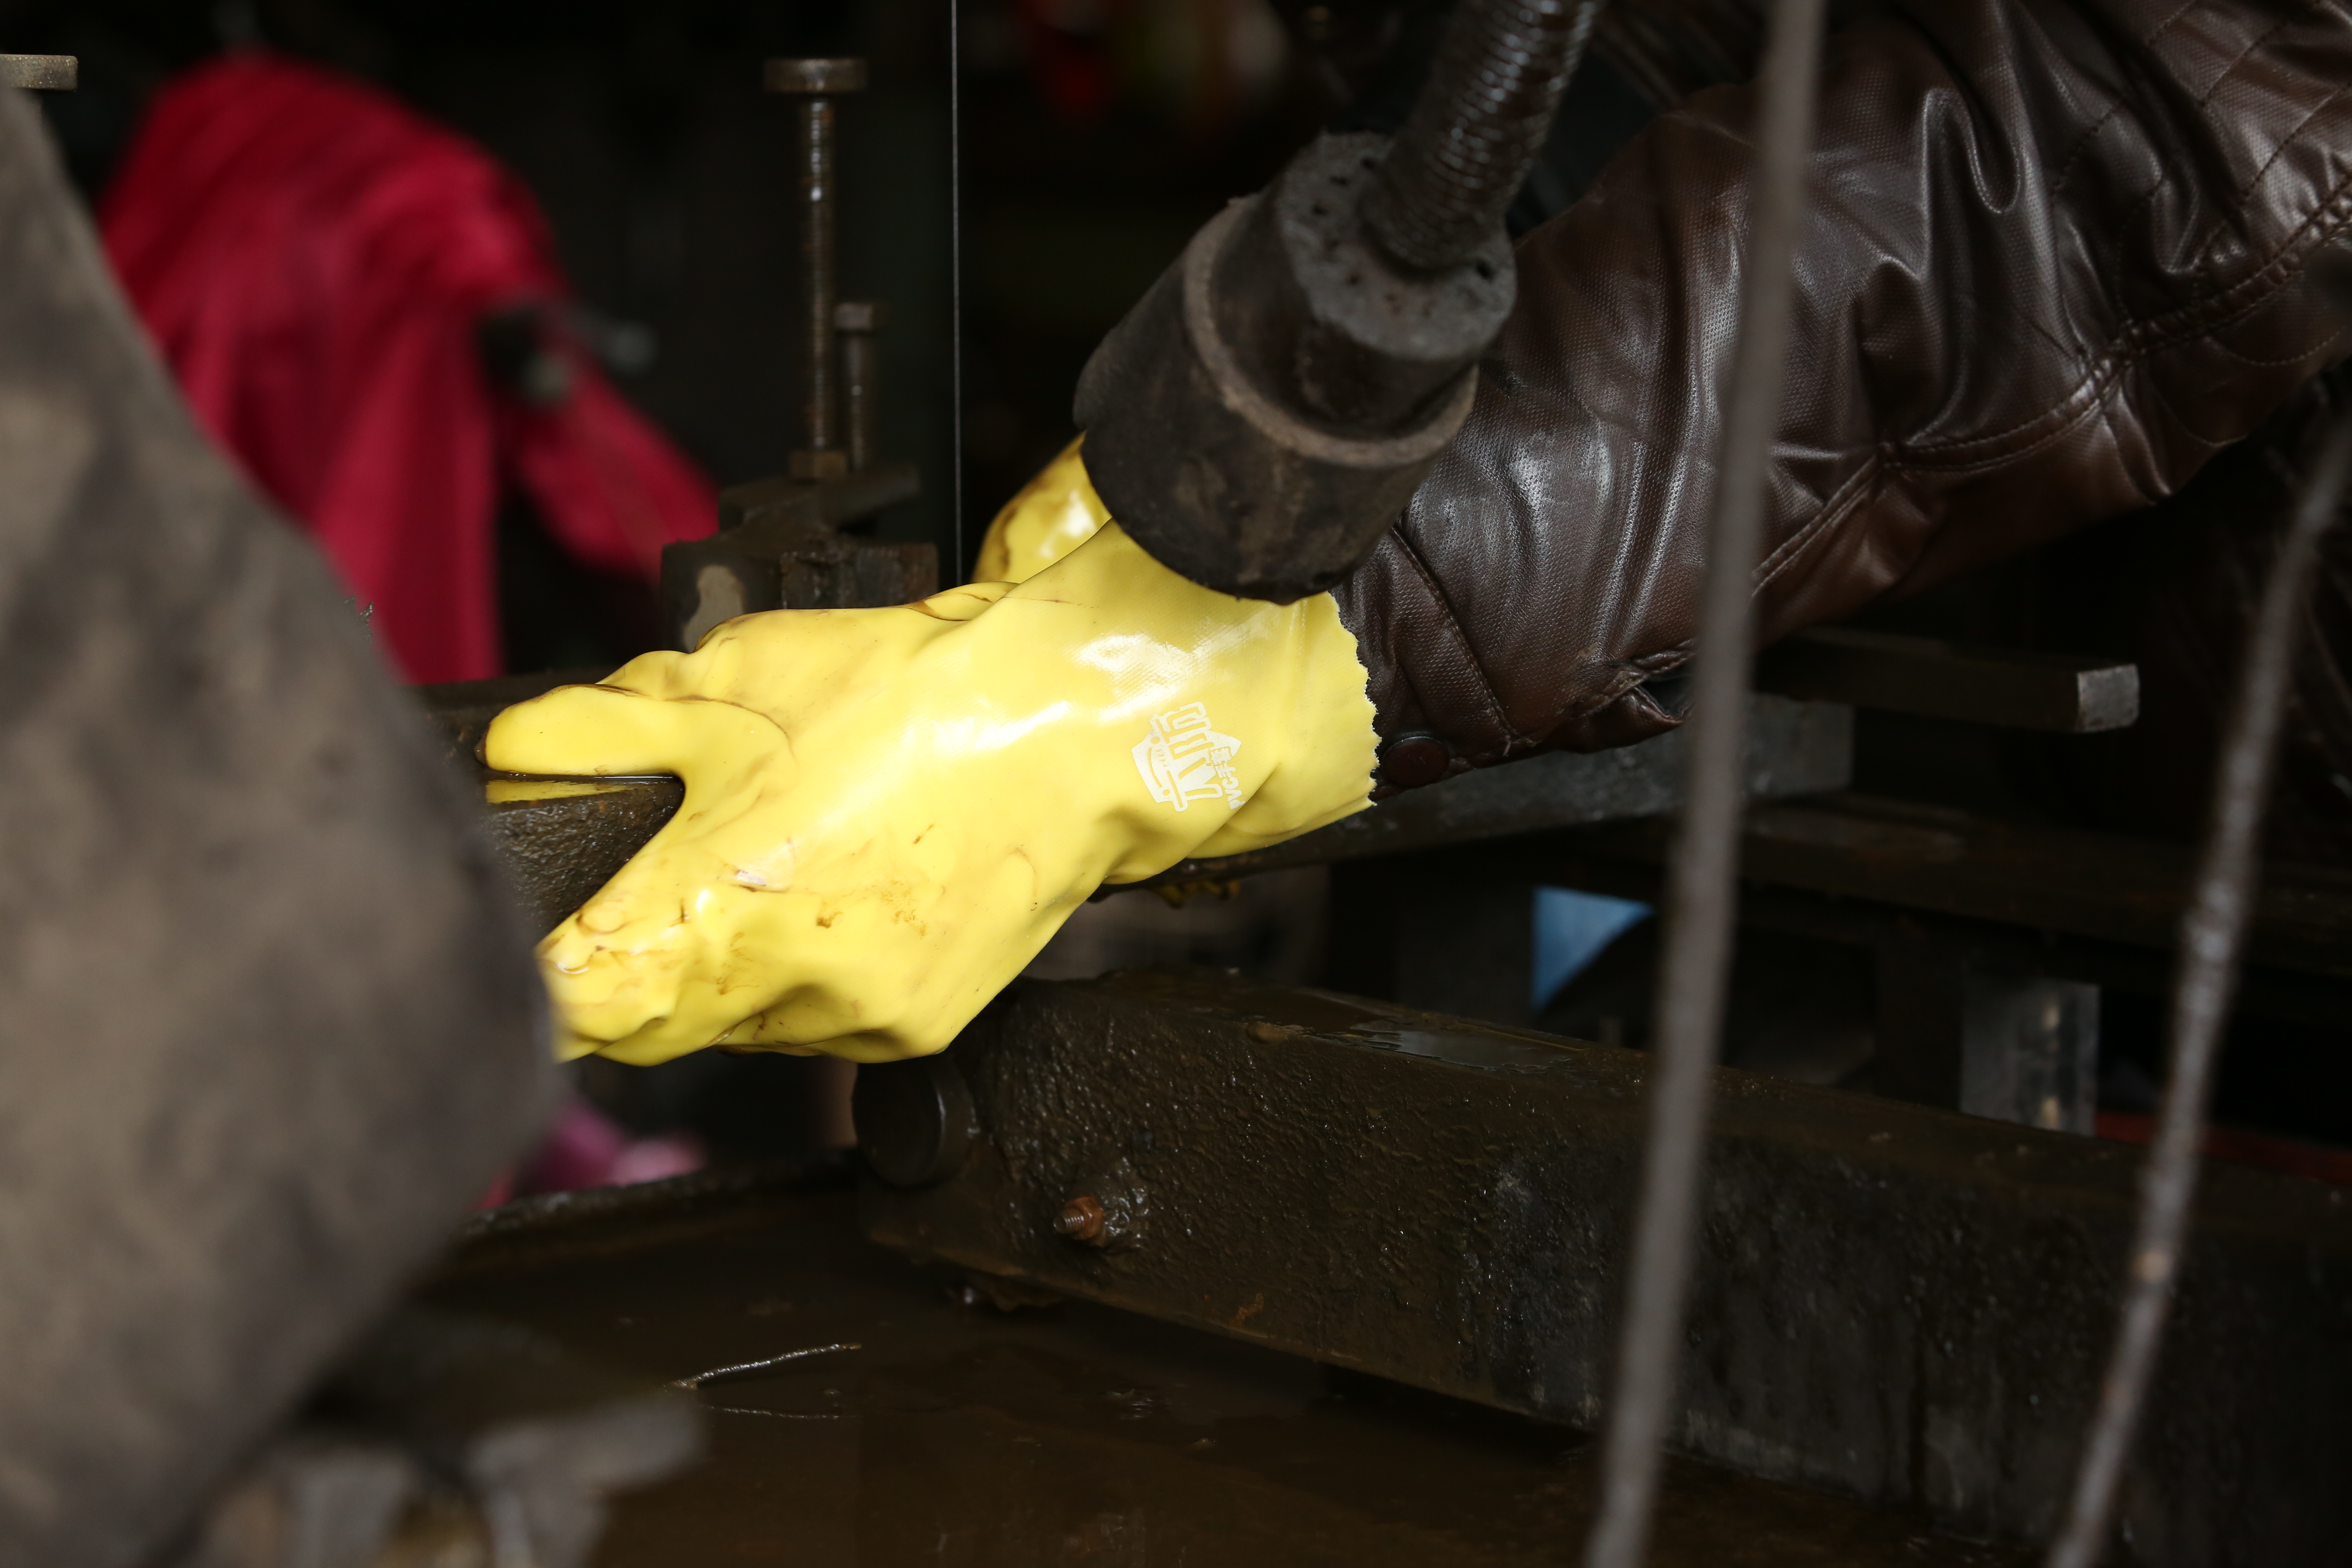 Chemical PVC coated gloves